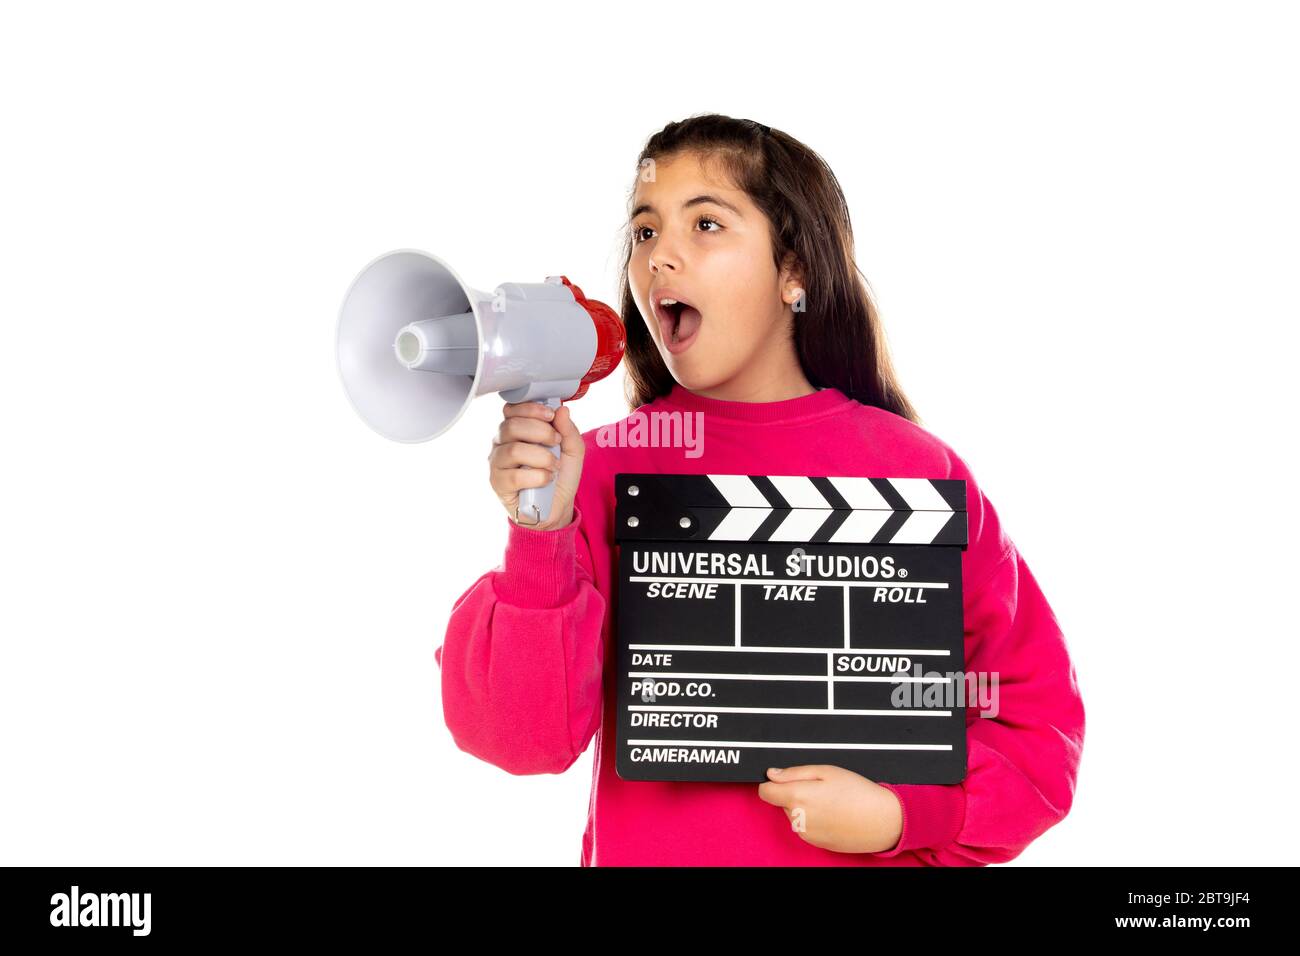 Adorable girl with a Clapperboard and a megaphone, isolated on a white background Stock Photo